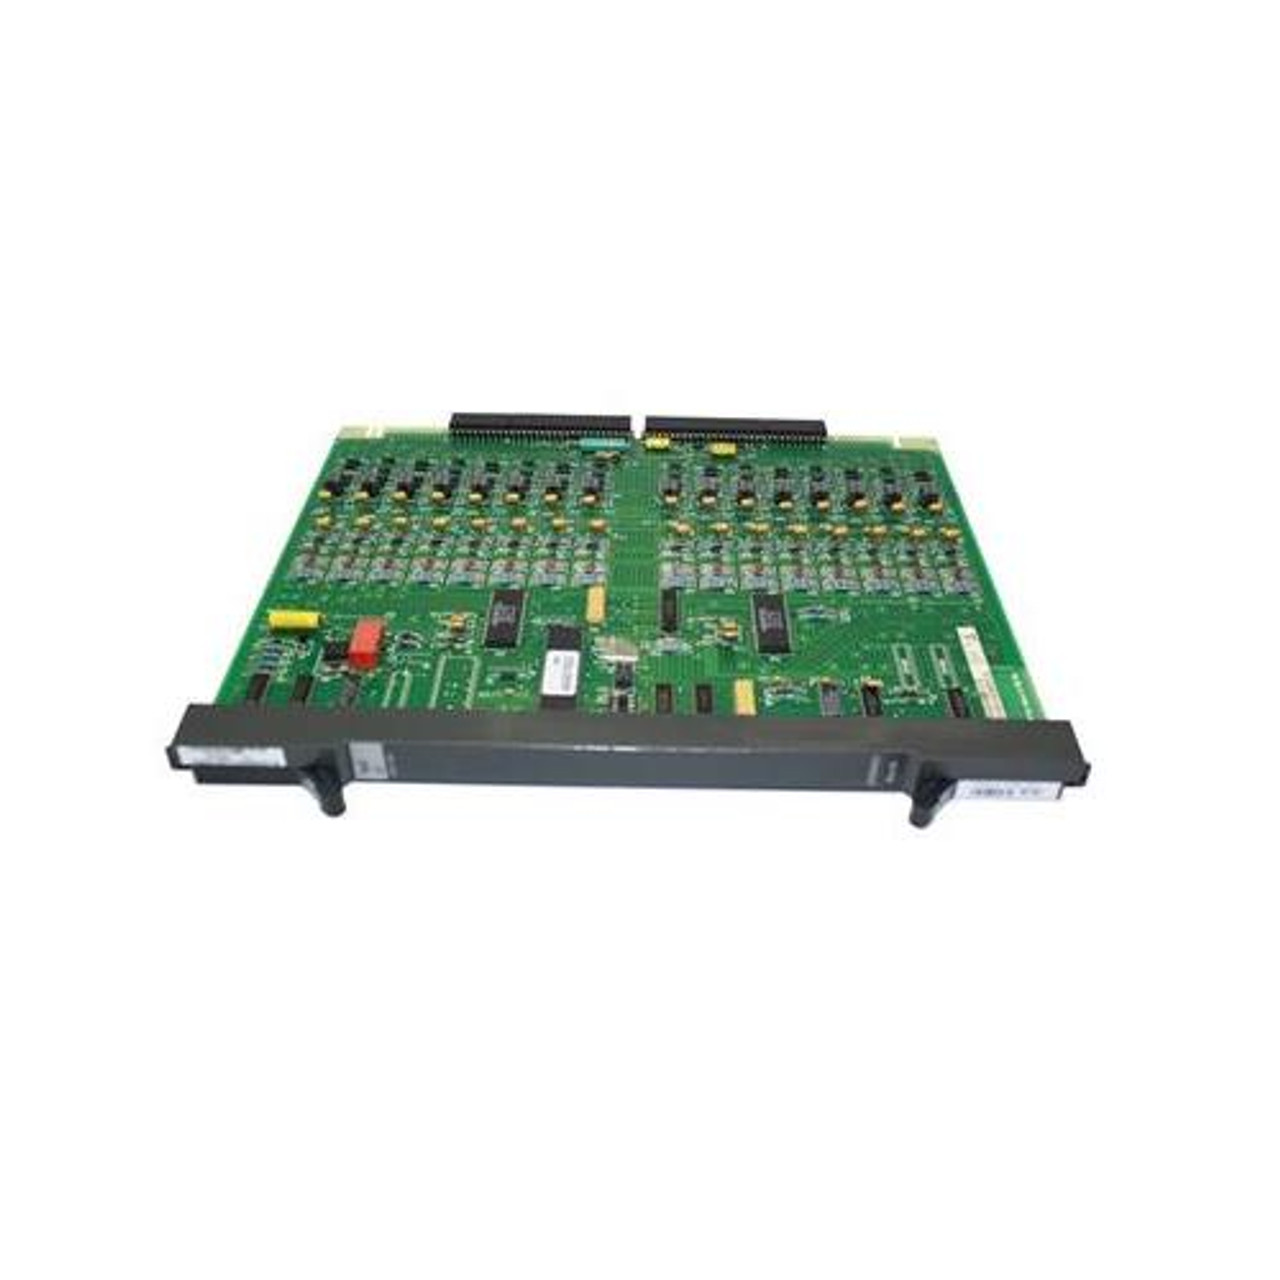 104276R4 Nortel Circuit Board for Bcn-router Fre2 (Refurbished)